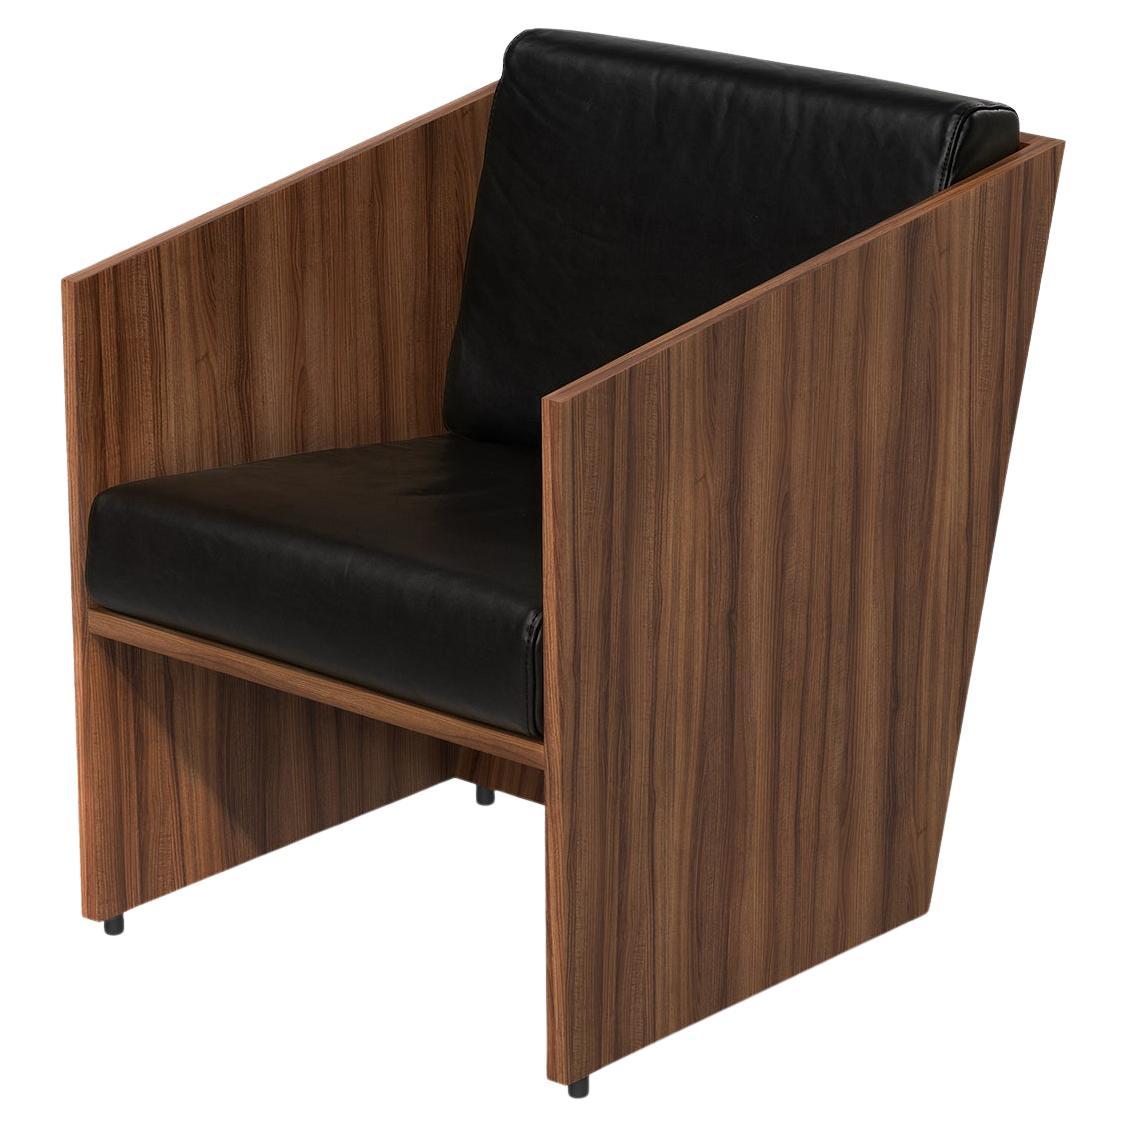 Álvaro Siza Vieira - Armchair in Walnut Wood and Black Leather - one of a kind For Sale